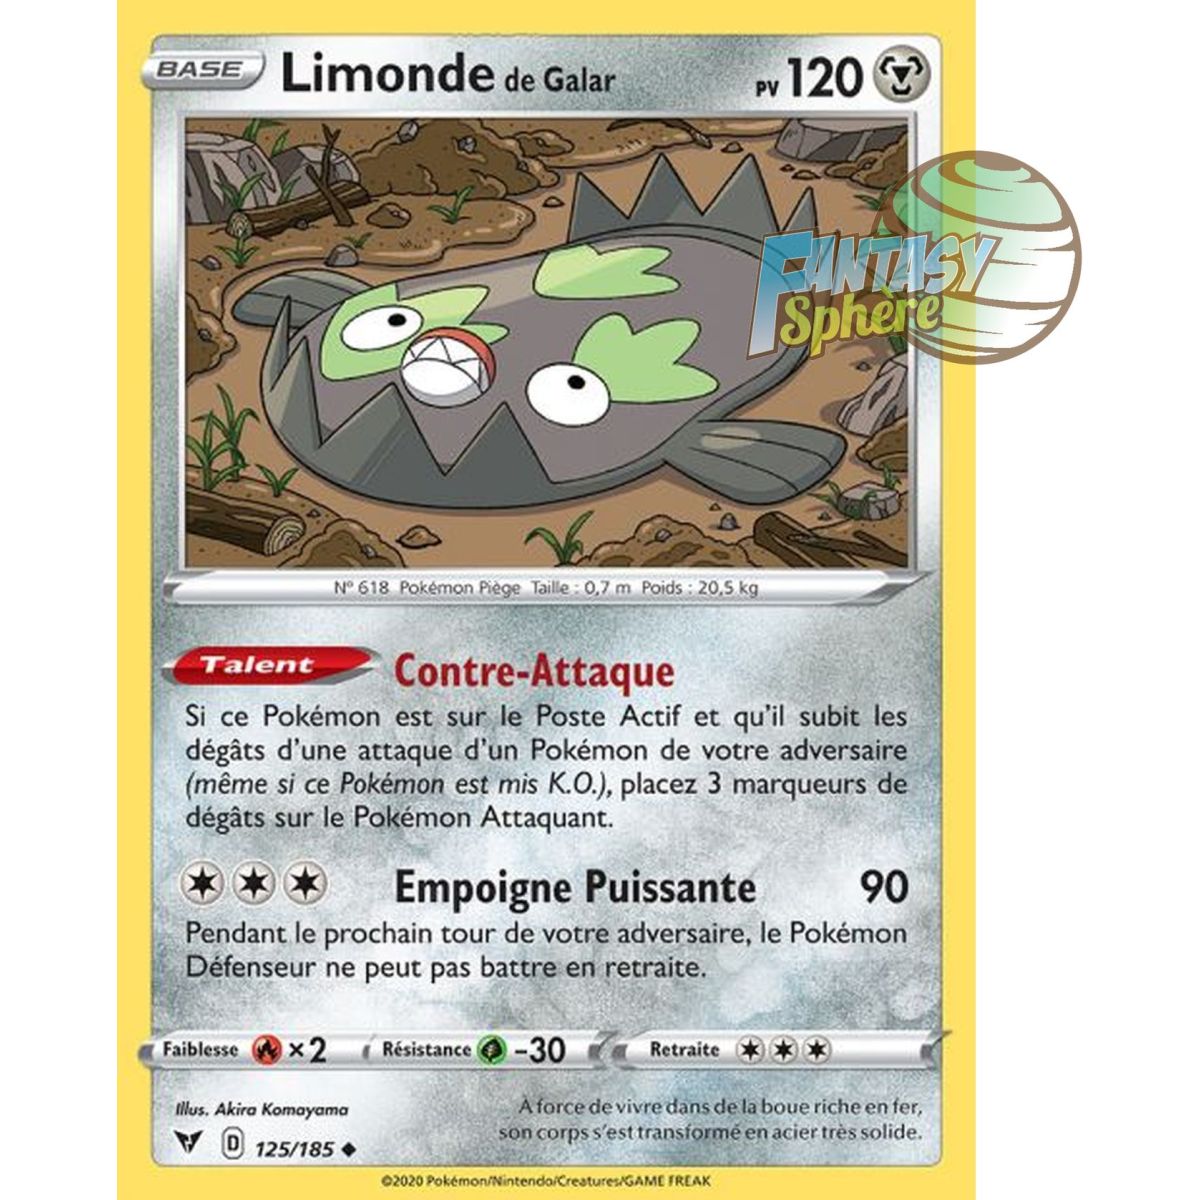 Galarian Lime - Uncommon 125/185 - Sword and Shield 4 Brilliant Voltage